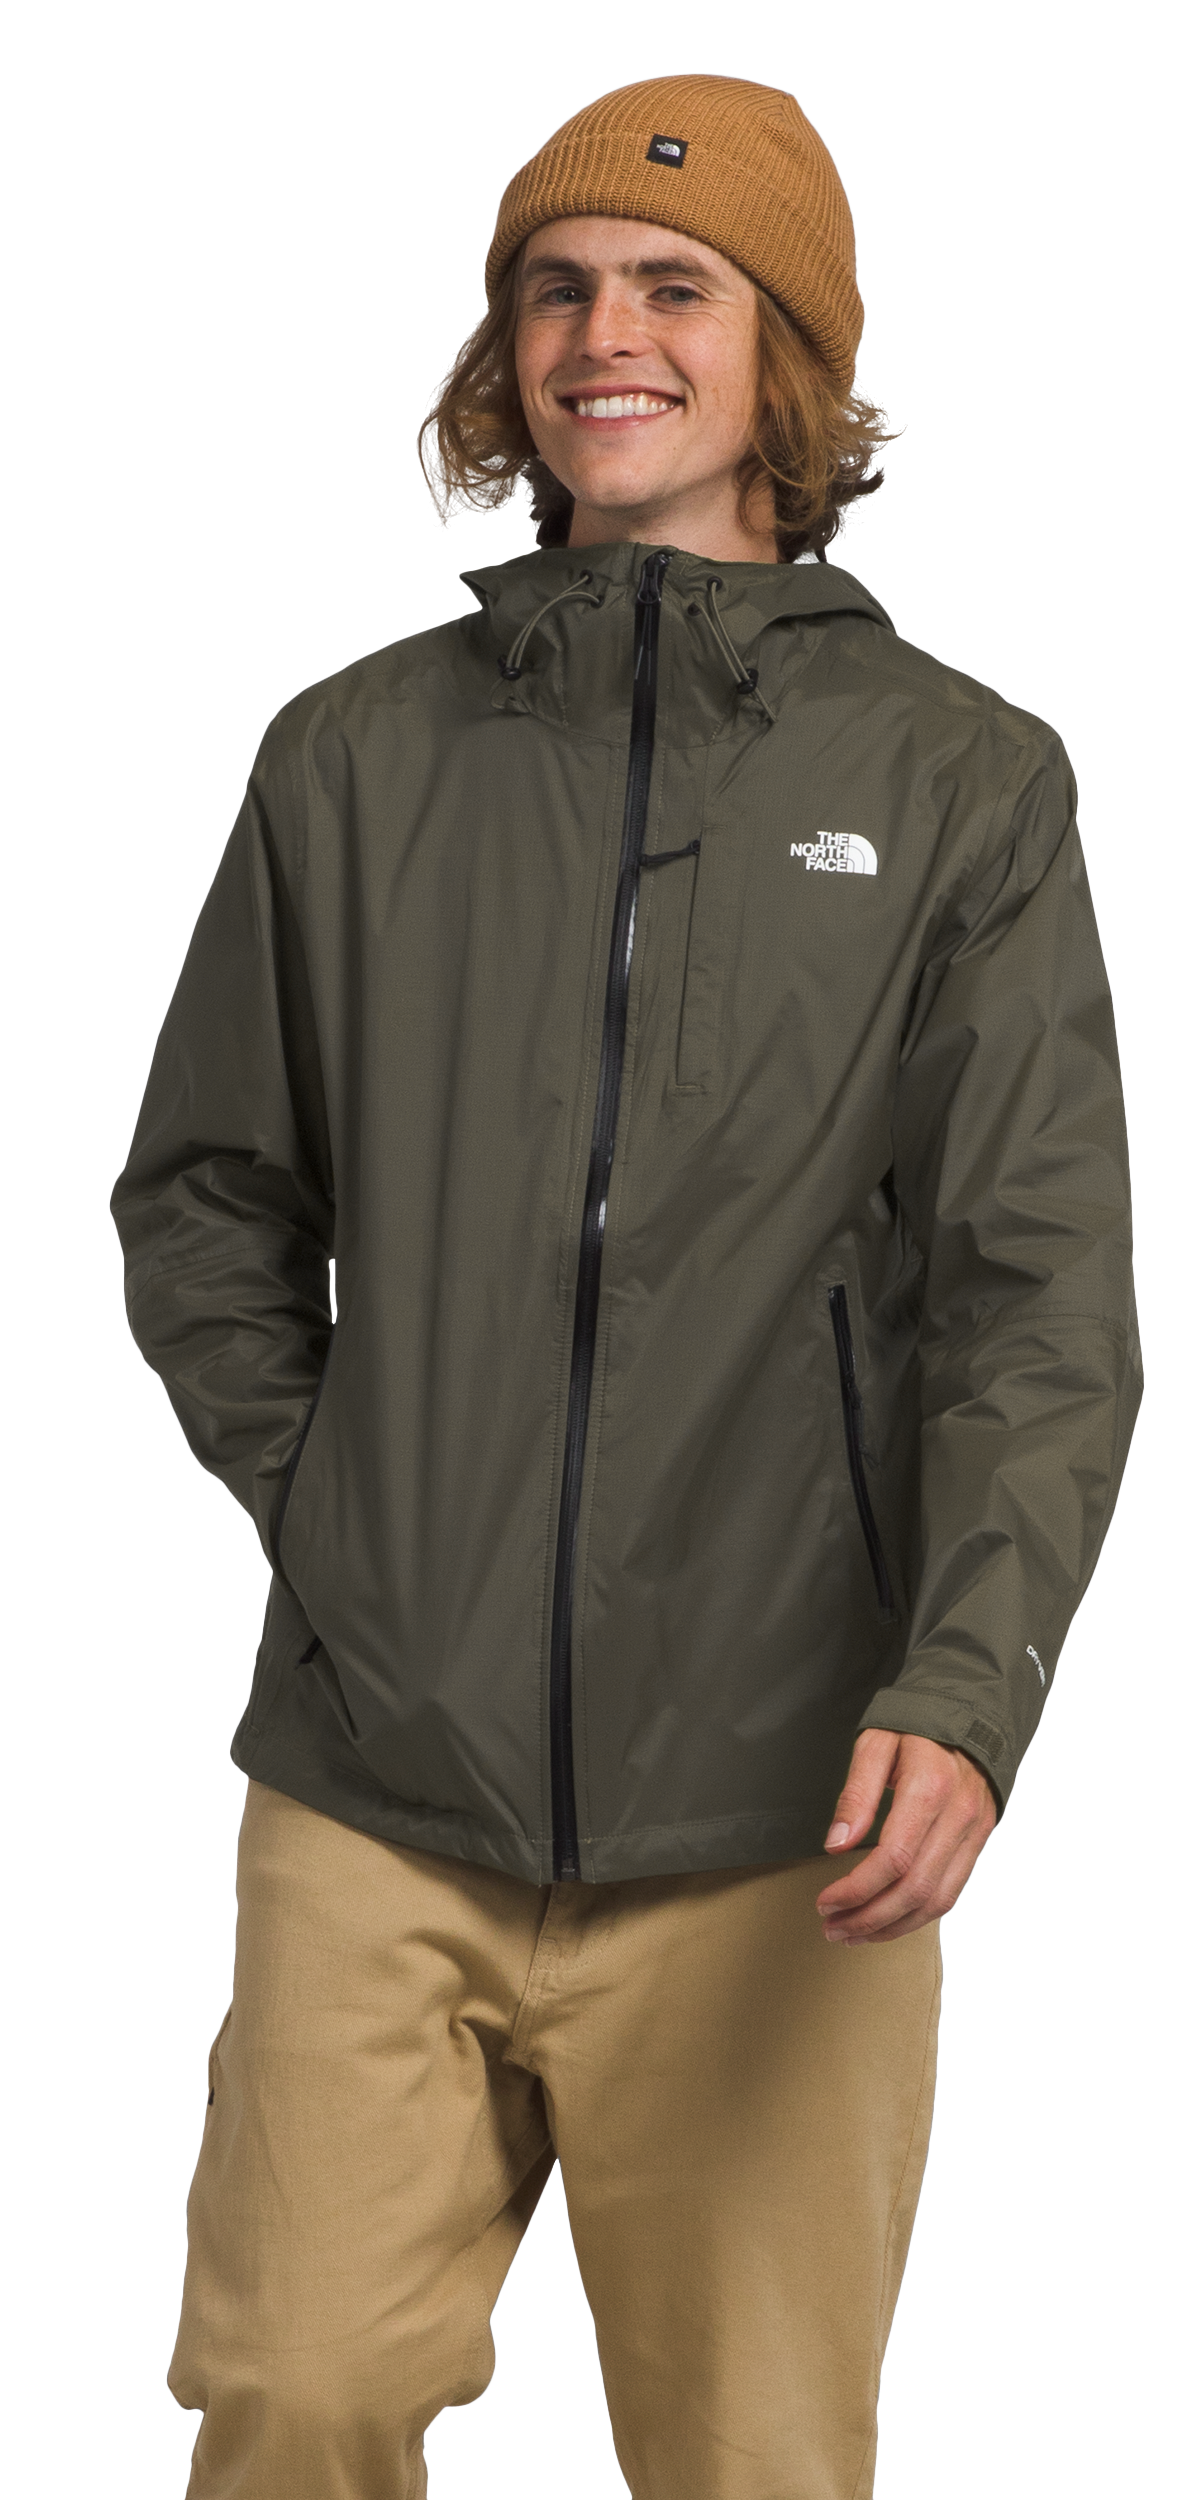 The North Face Alta Vista Jacket for Men - New Taupe Green - XL